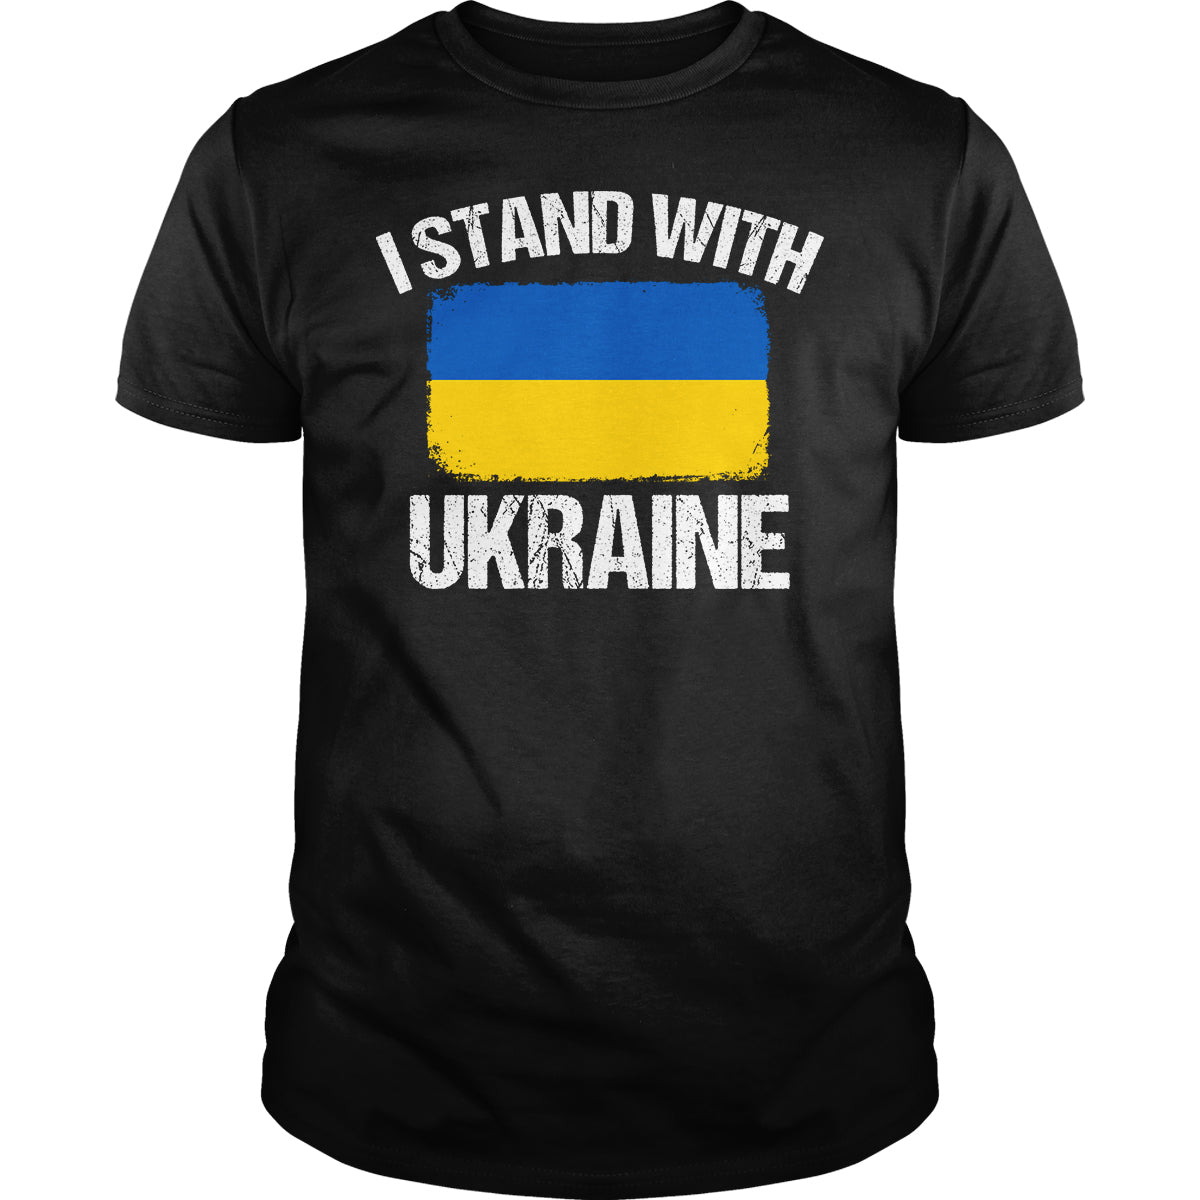 I Stand With Ukraine - BustedTees.com